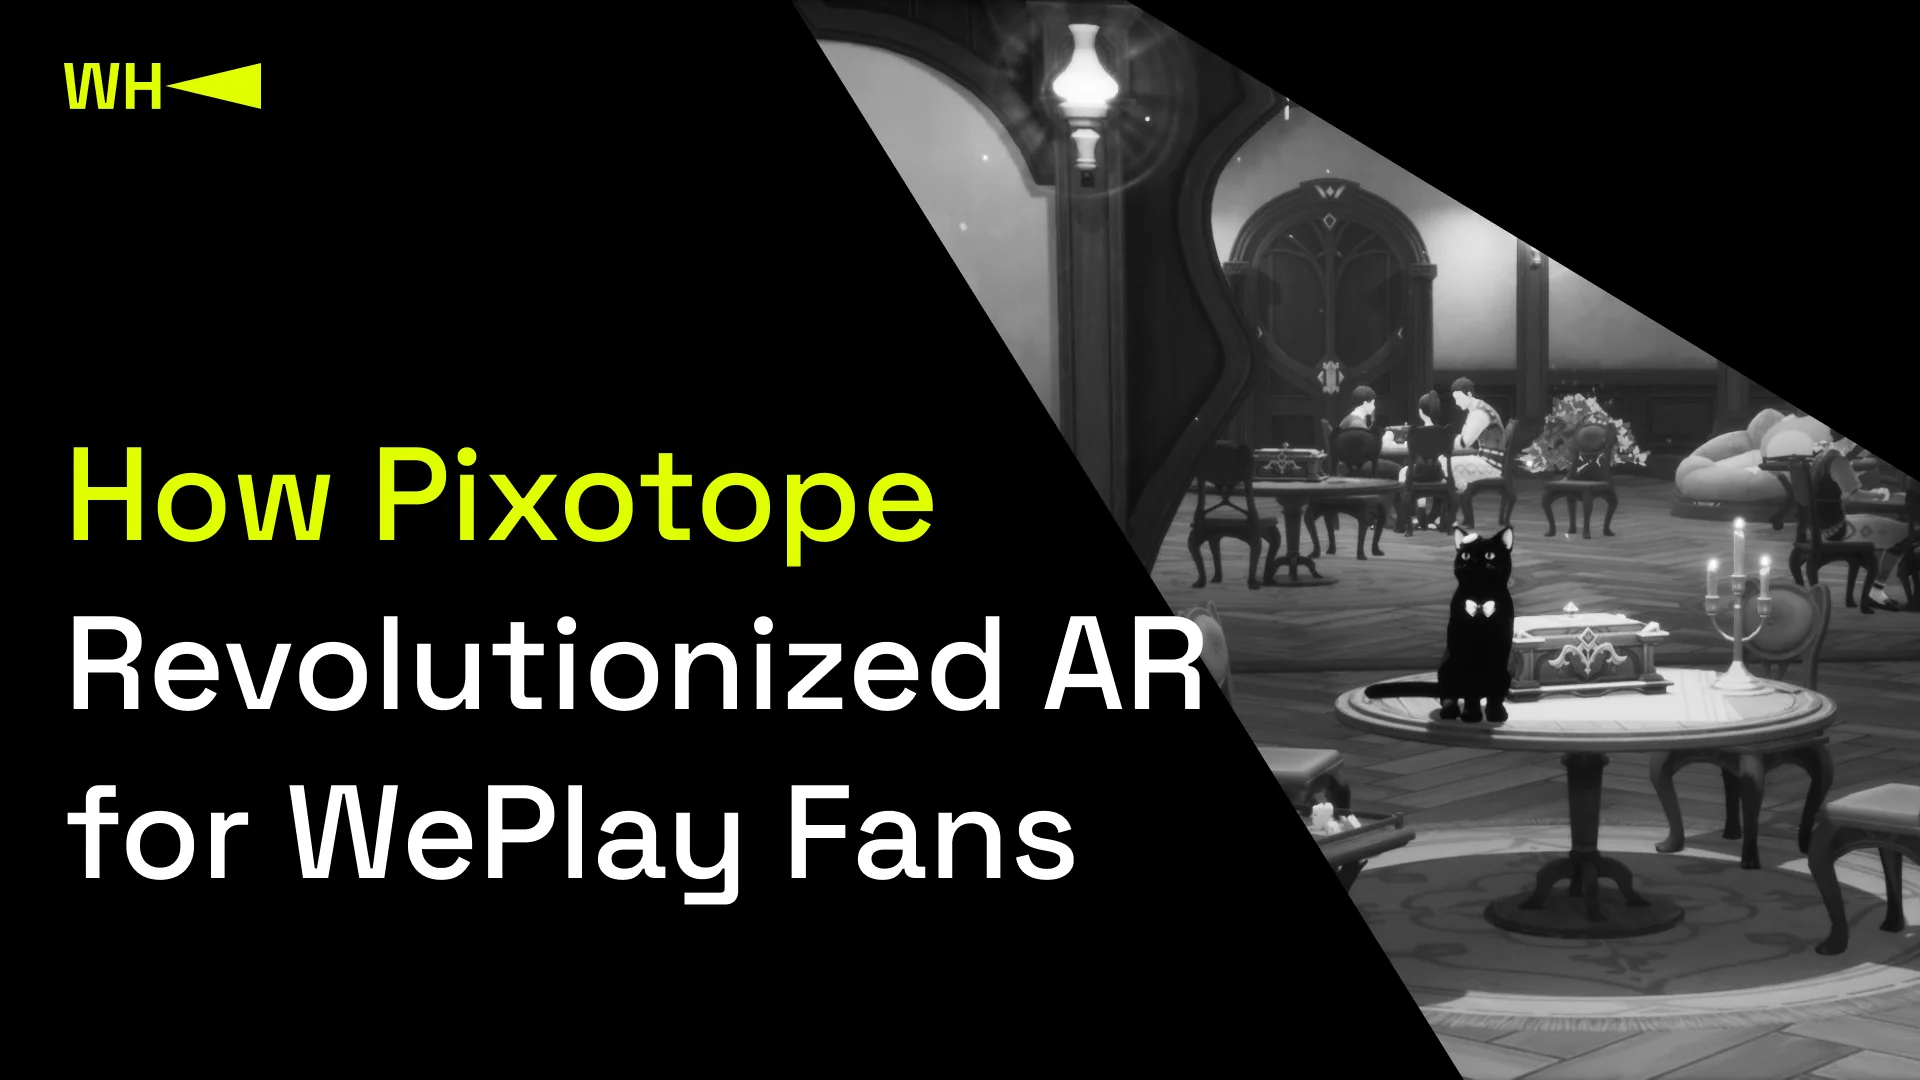 How Pixotope Revolutionized AR for WePlay Fans